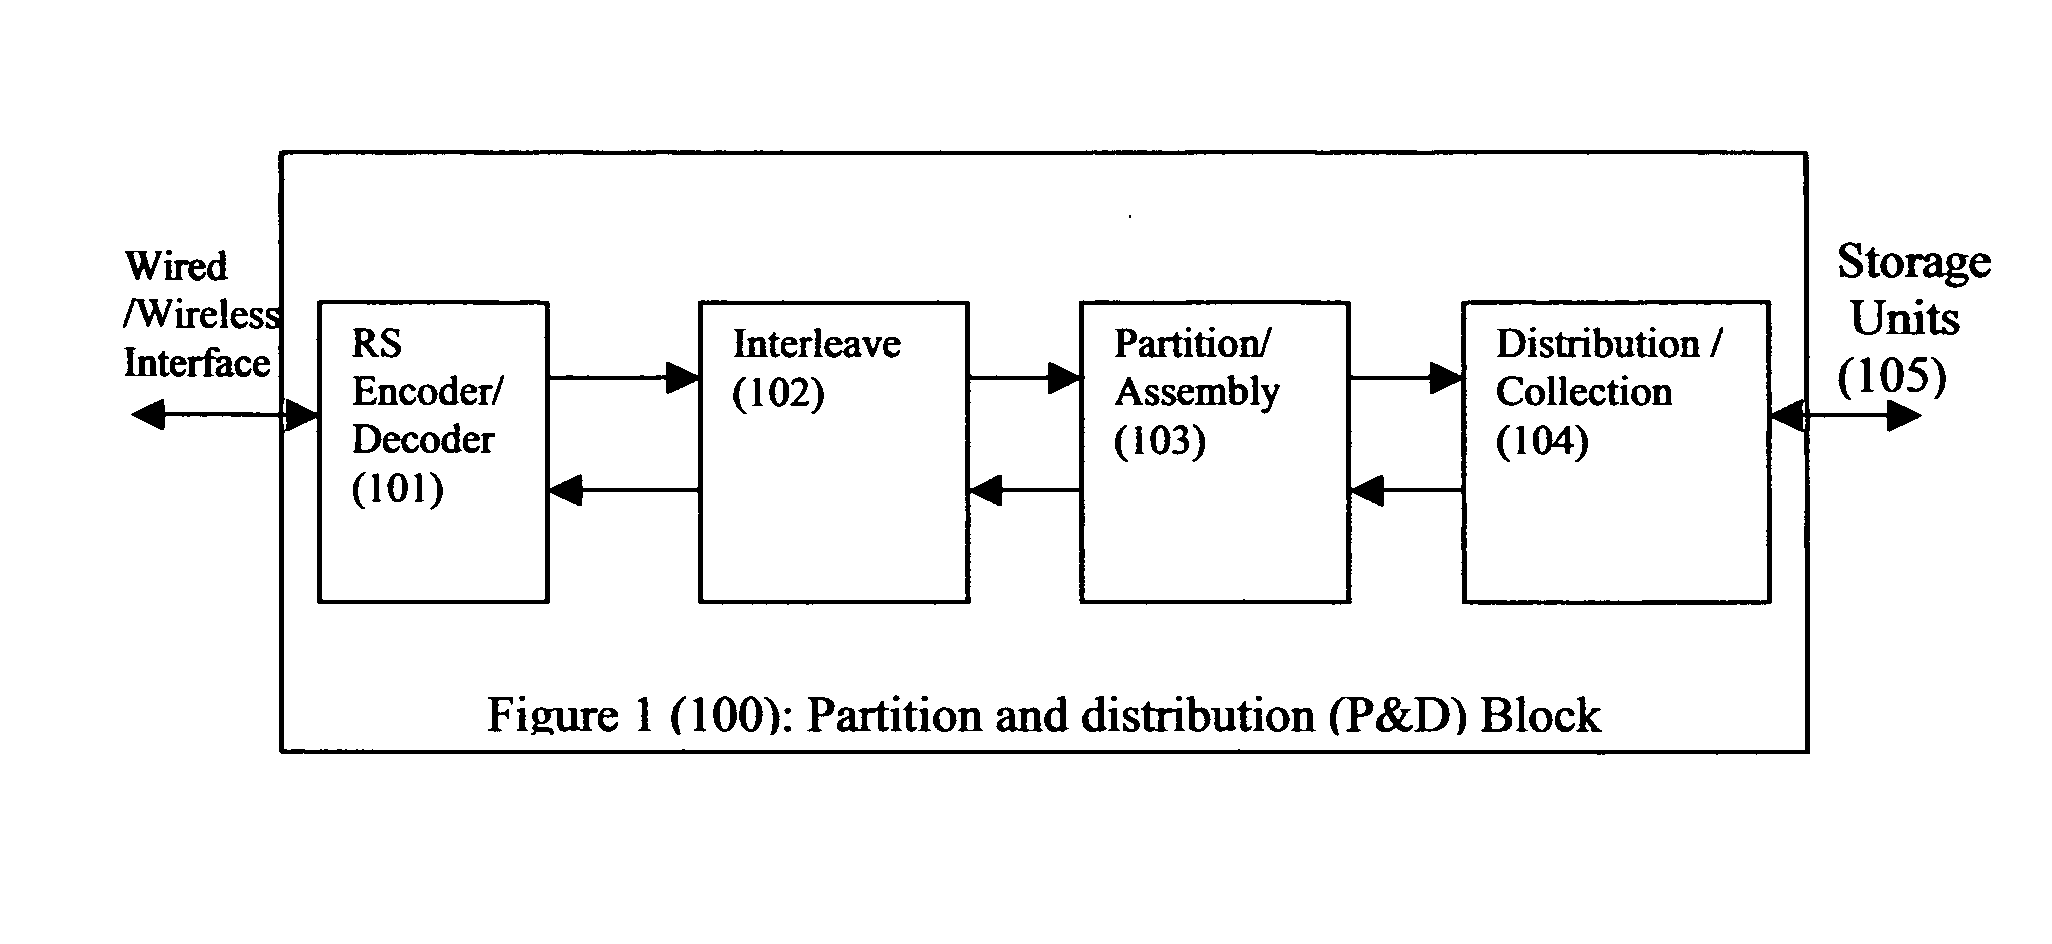 Method of maximizing the information access rate from/to storage units in wired/wireless networks